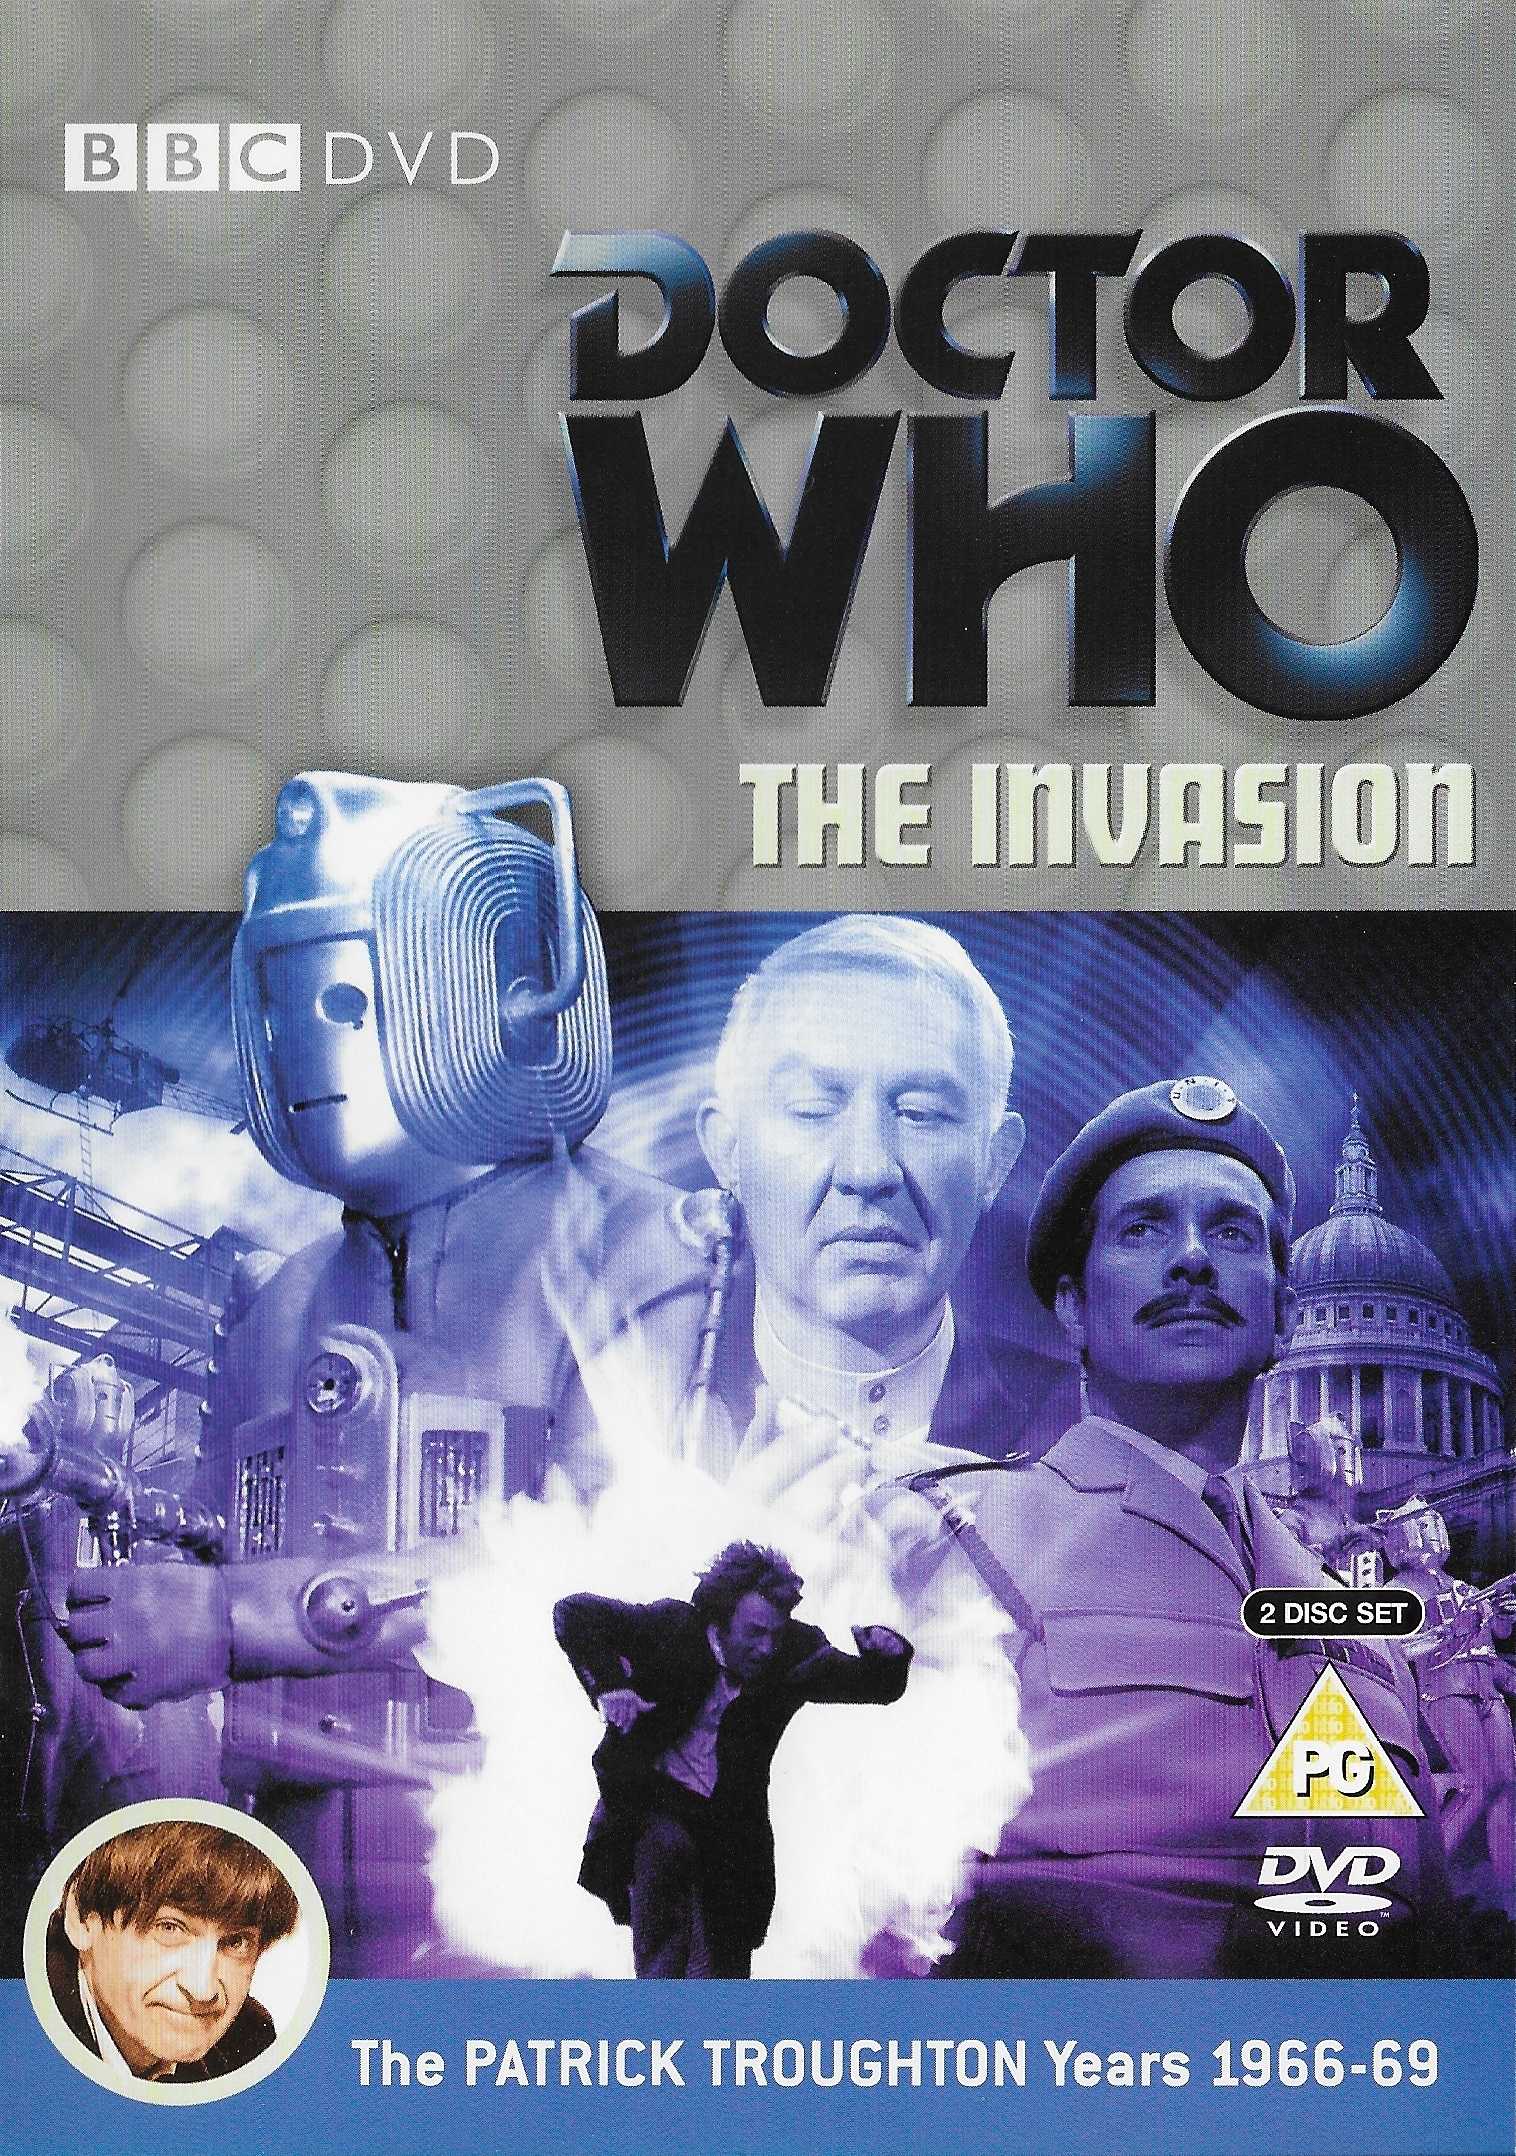 Picture of BBCDVD 1829 Doctor Who - The invasion by artist Derrick Sherwin from the BBC dvds - Records and Tapes library